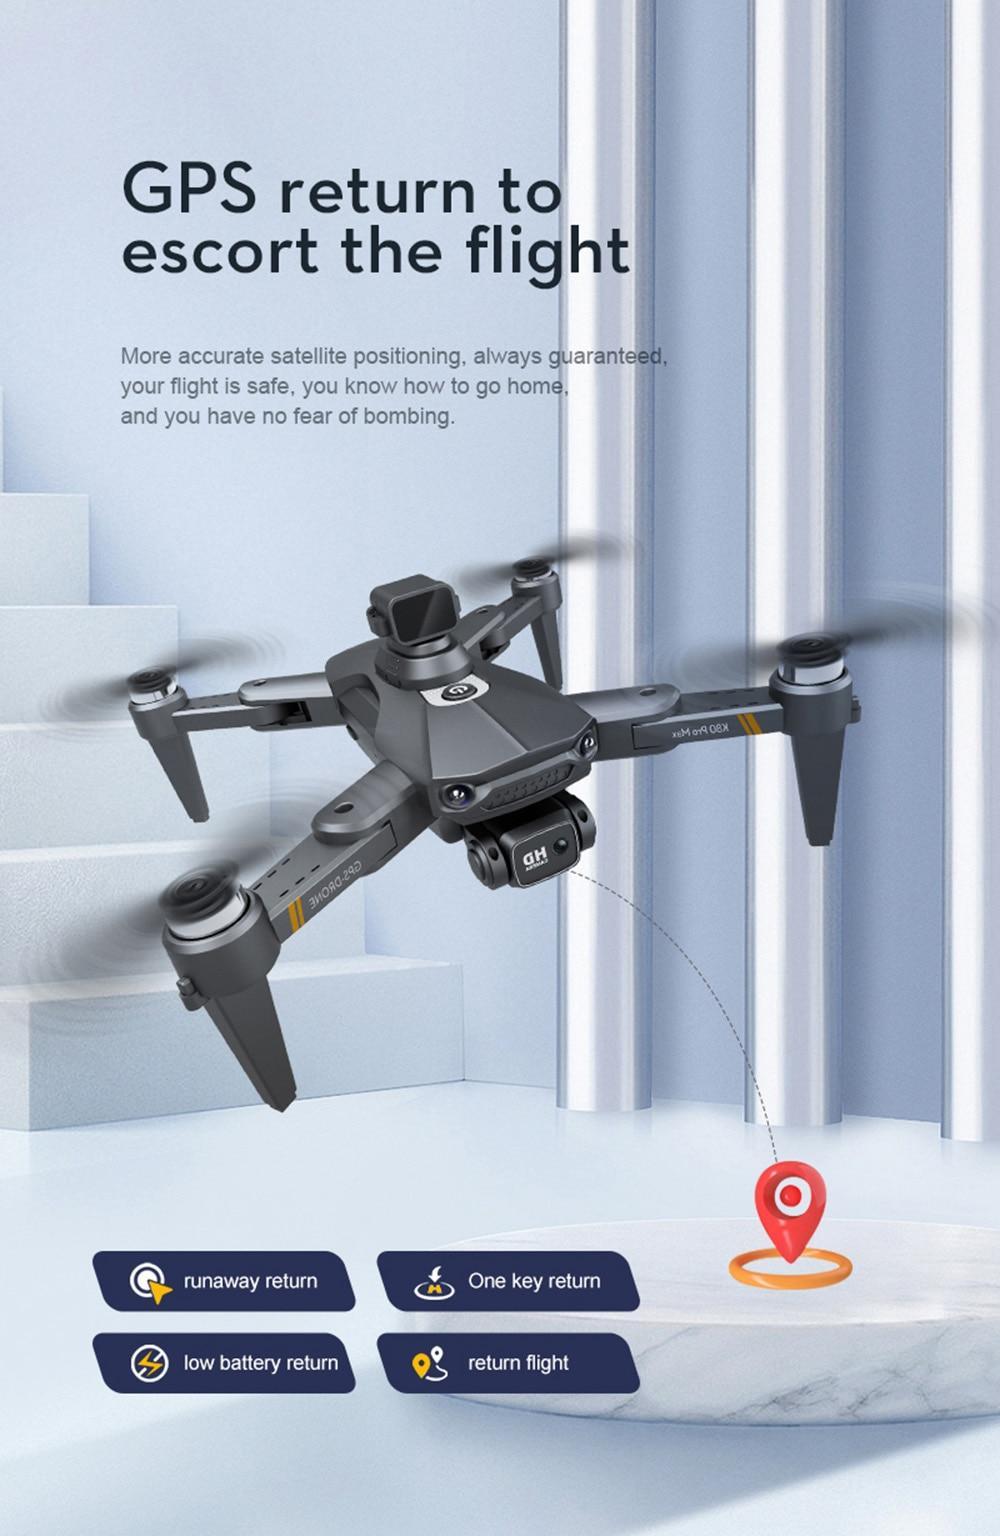 K80 PRO Quadcopter 4K Camera Drone GPS 5G Wifi Profesional Obstacle Avoidance Helicopter Brushless Motor RC Plane FPV Dron Toys